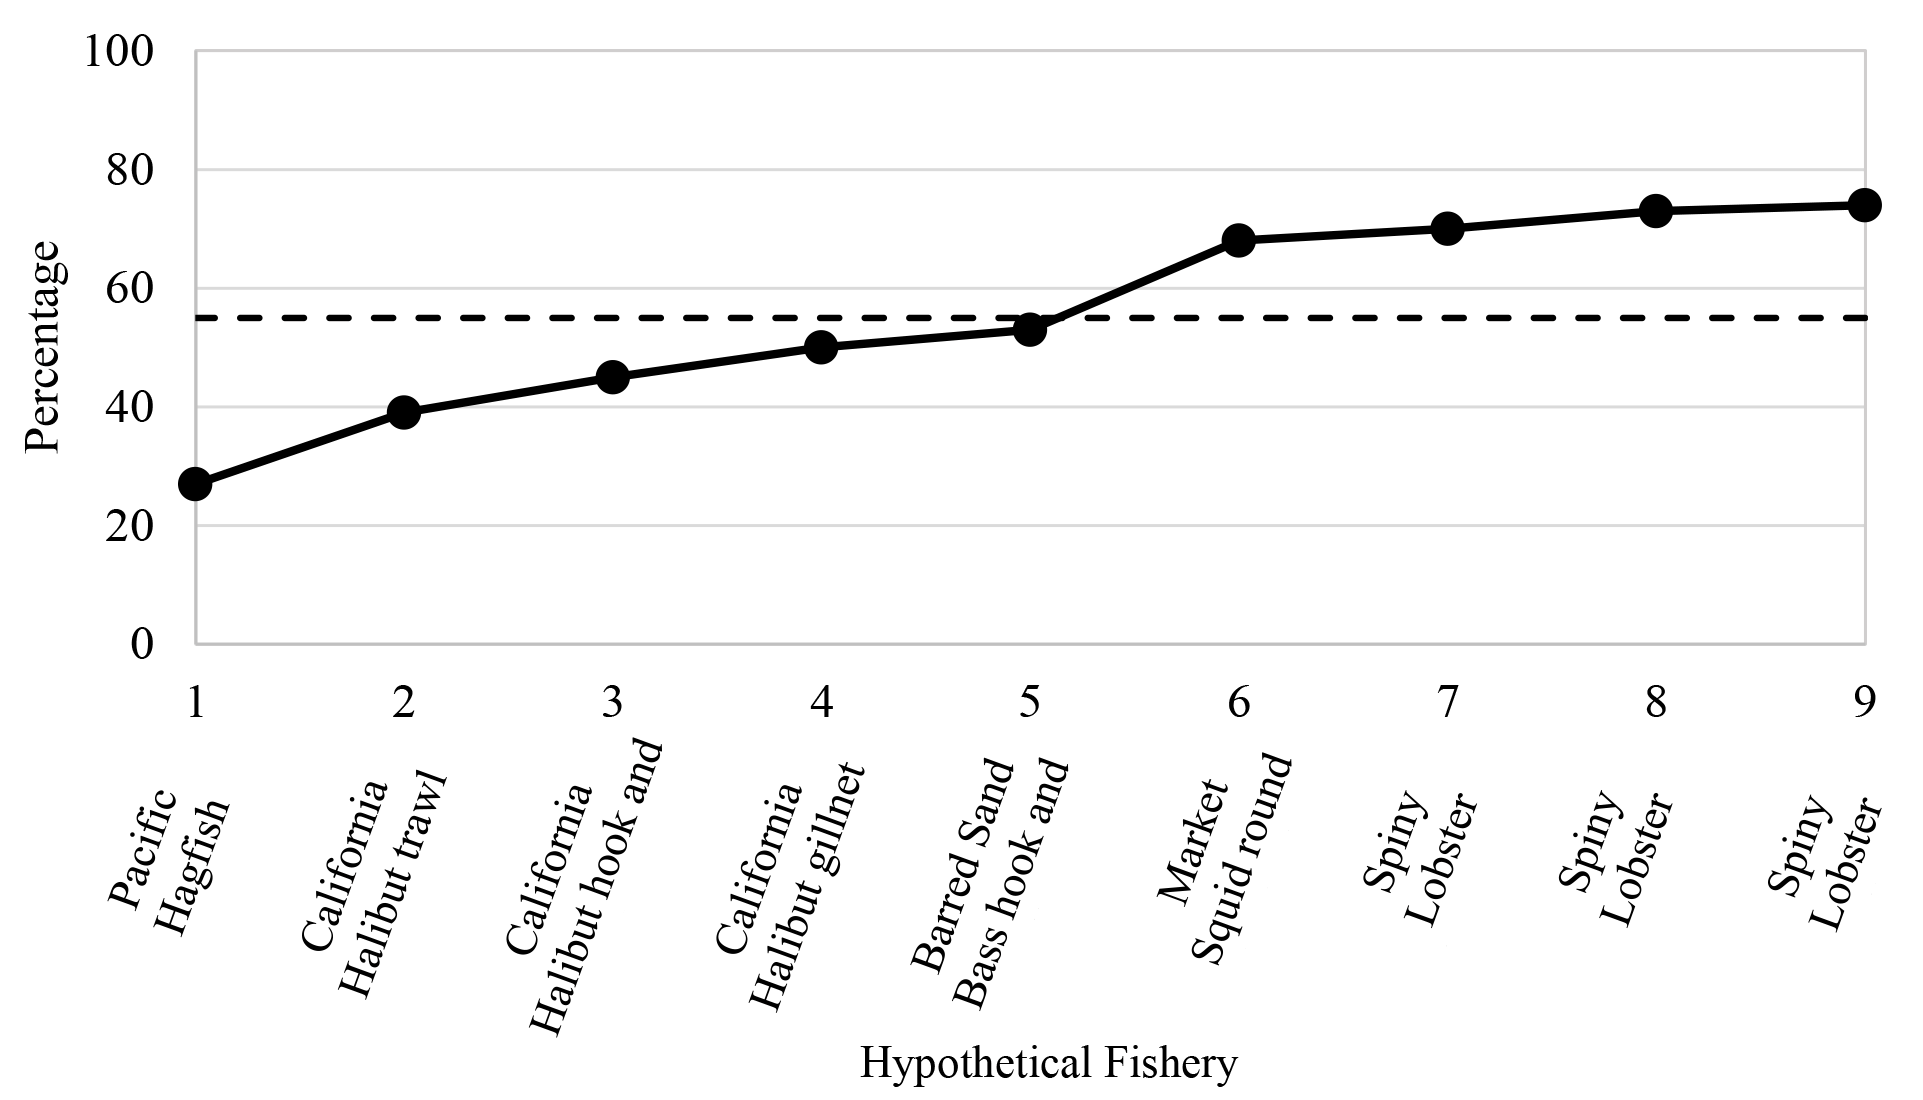 Figure F2. Overall response values for a suite of hypothetical fisheries on a scale from 0% to 100%